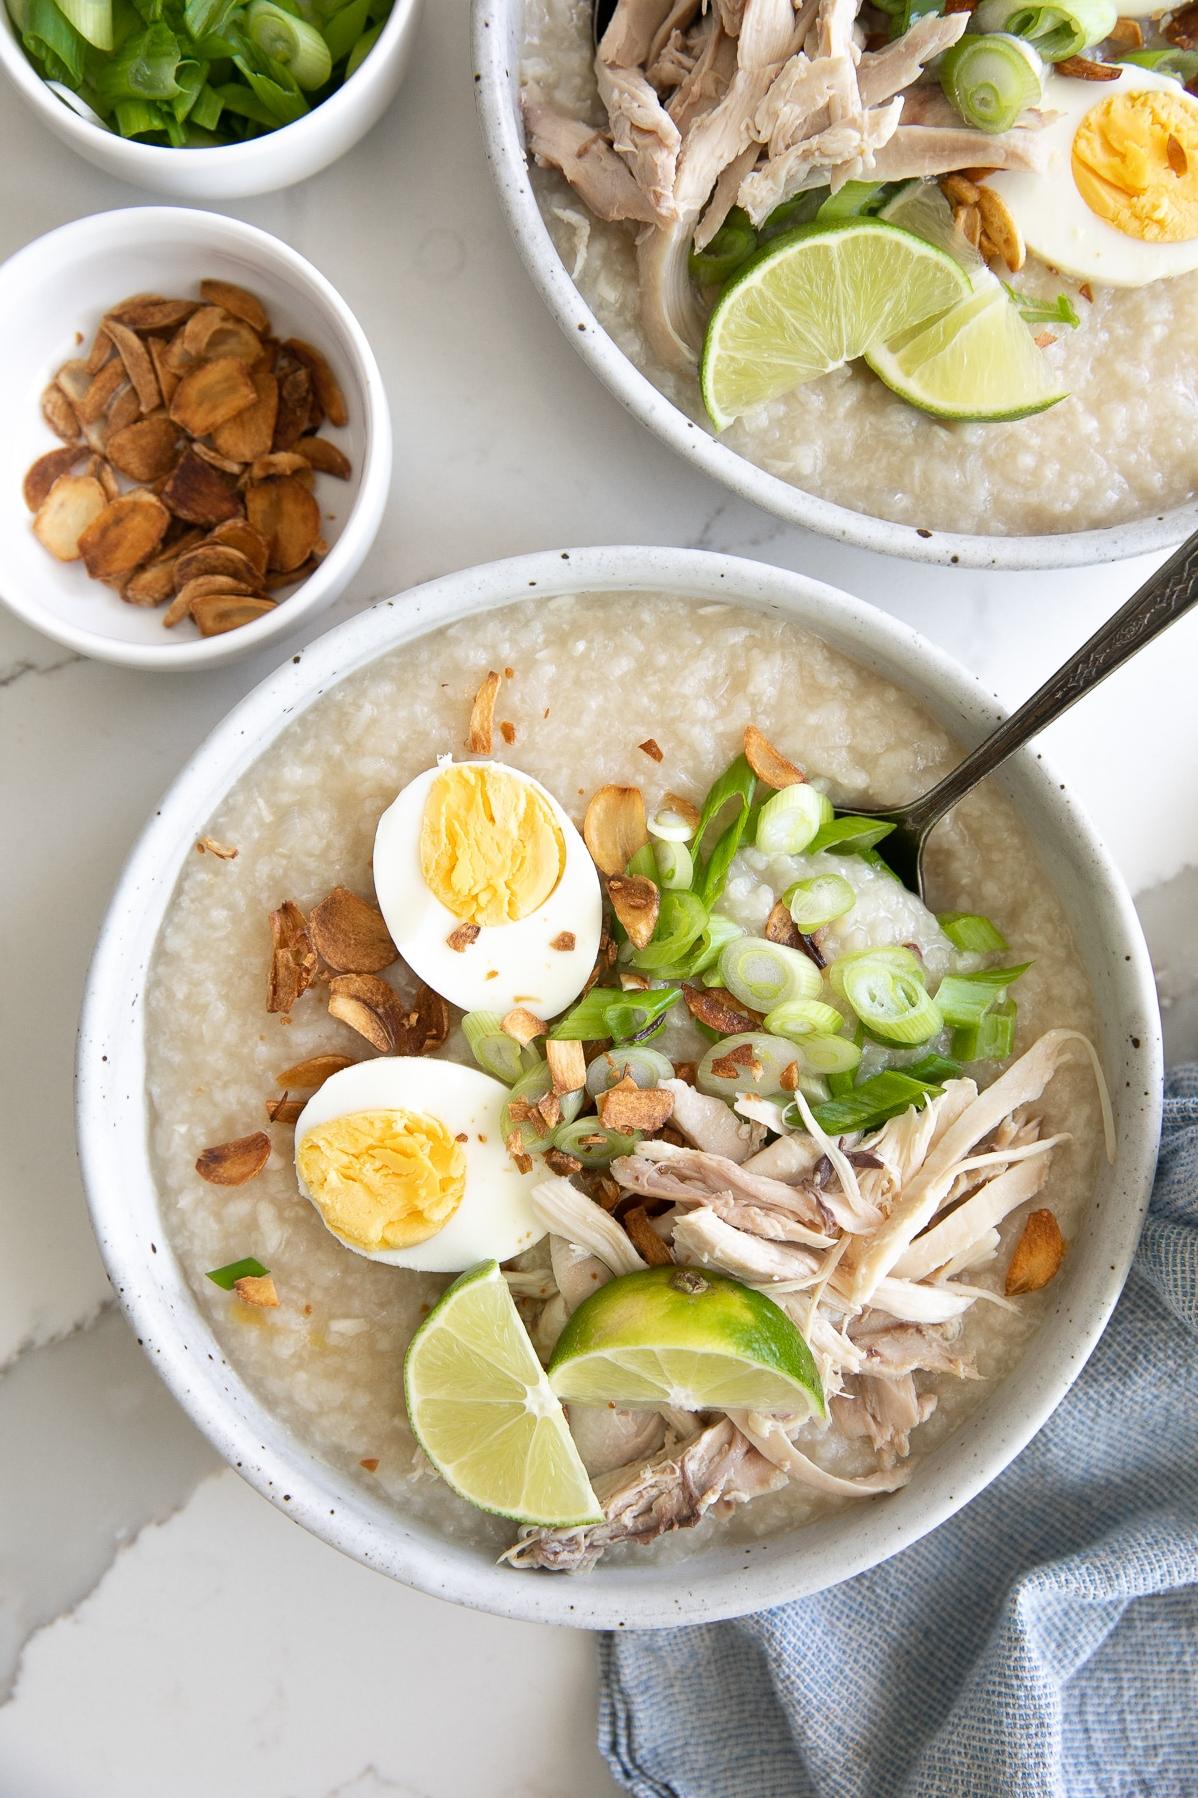  Make family dinner fun with this tasty twist on traditional rice porridge.